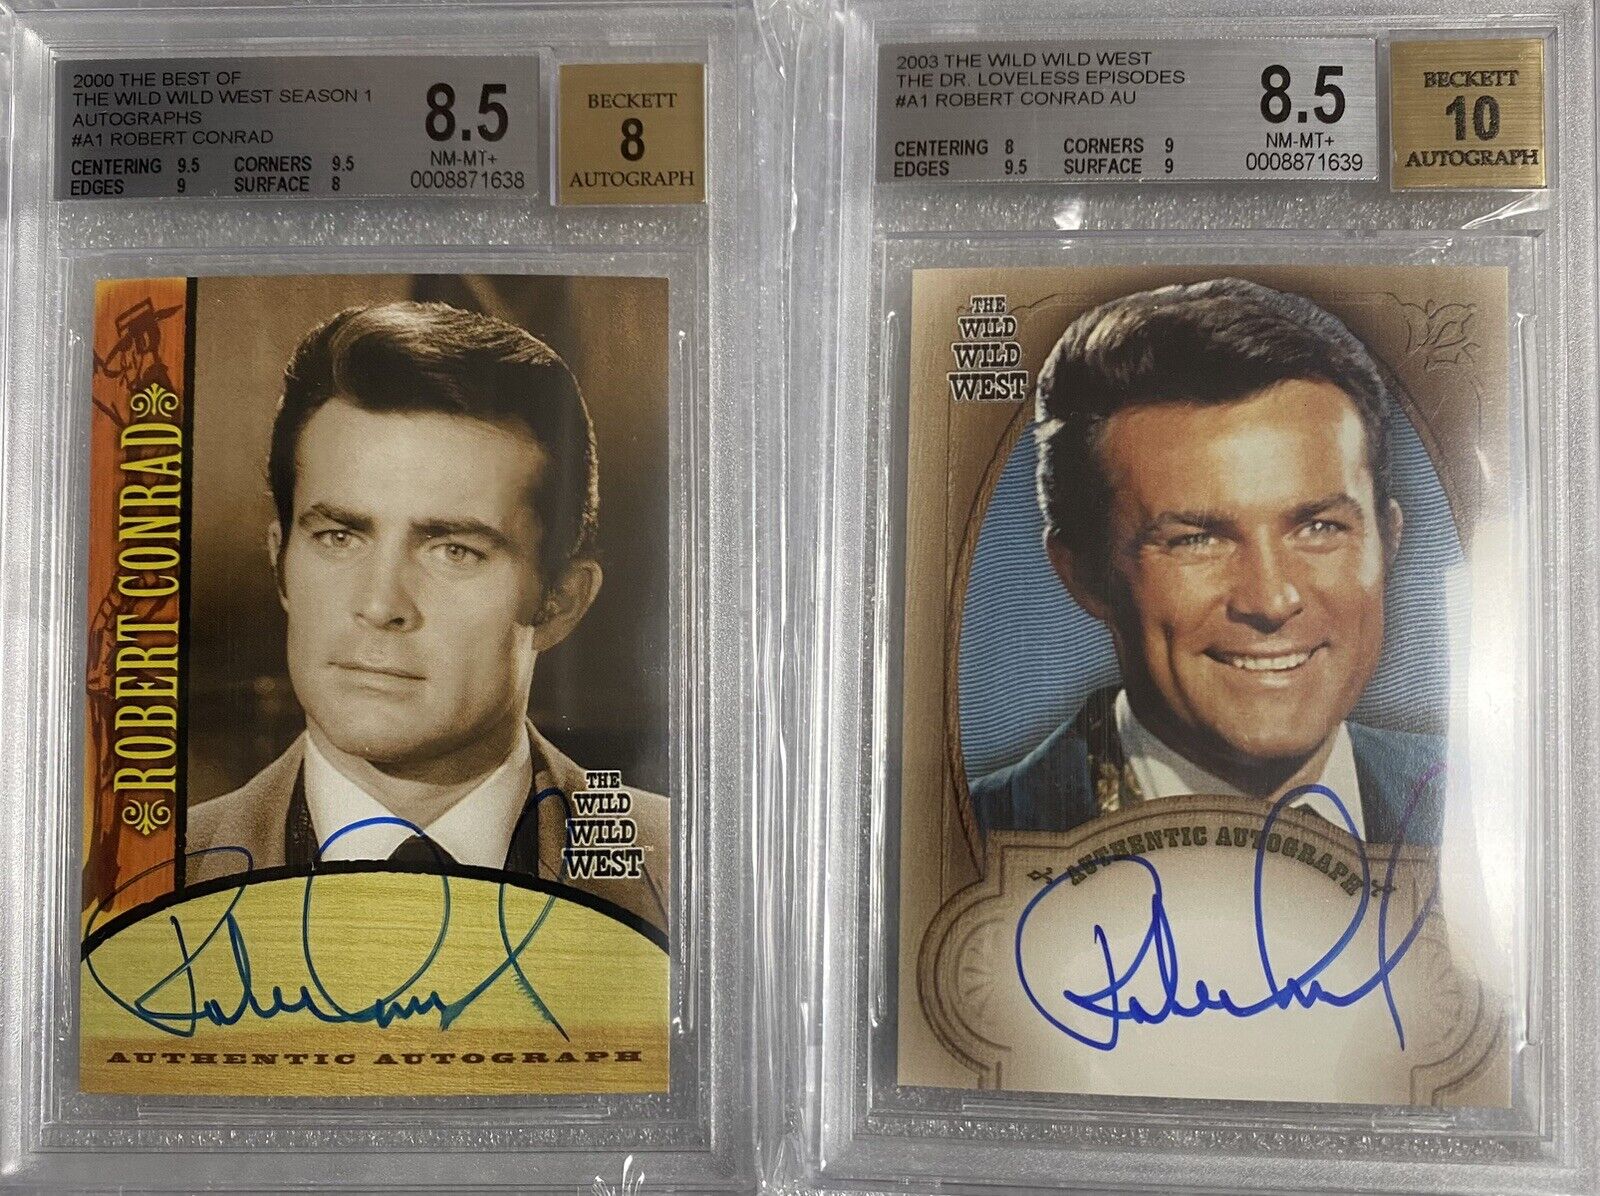 2 Wild Wild West Robert Conrad Autograph Cards - 2000 A1 and 2003 A1 - BGS 8.5